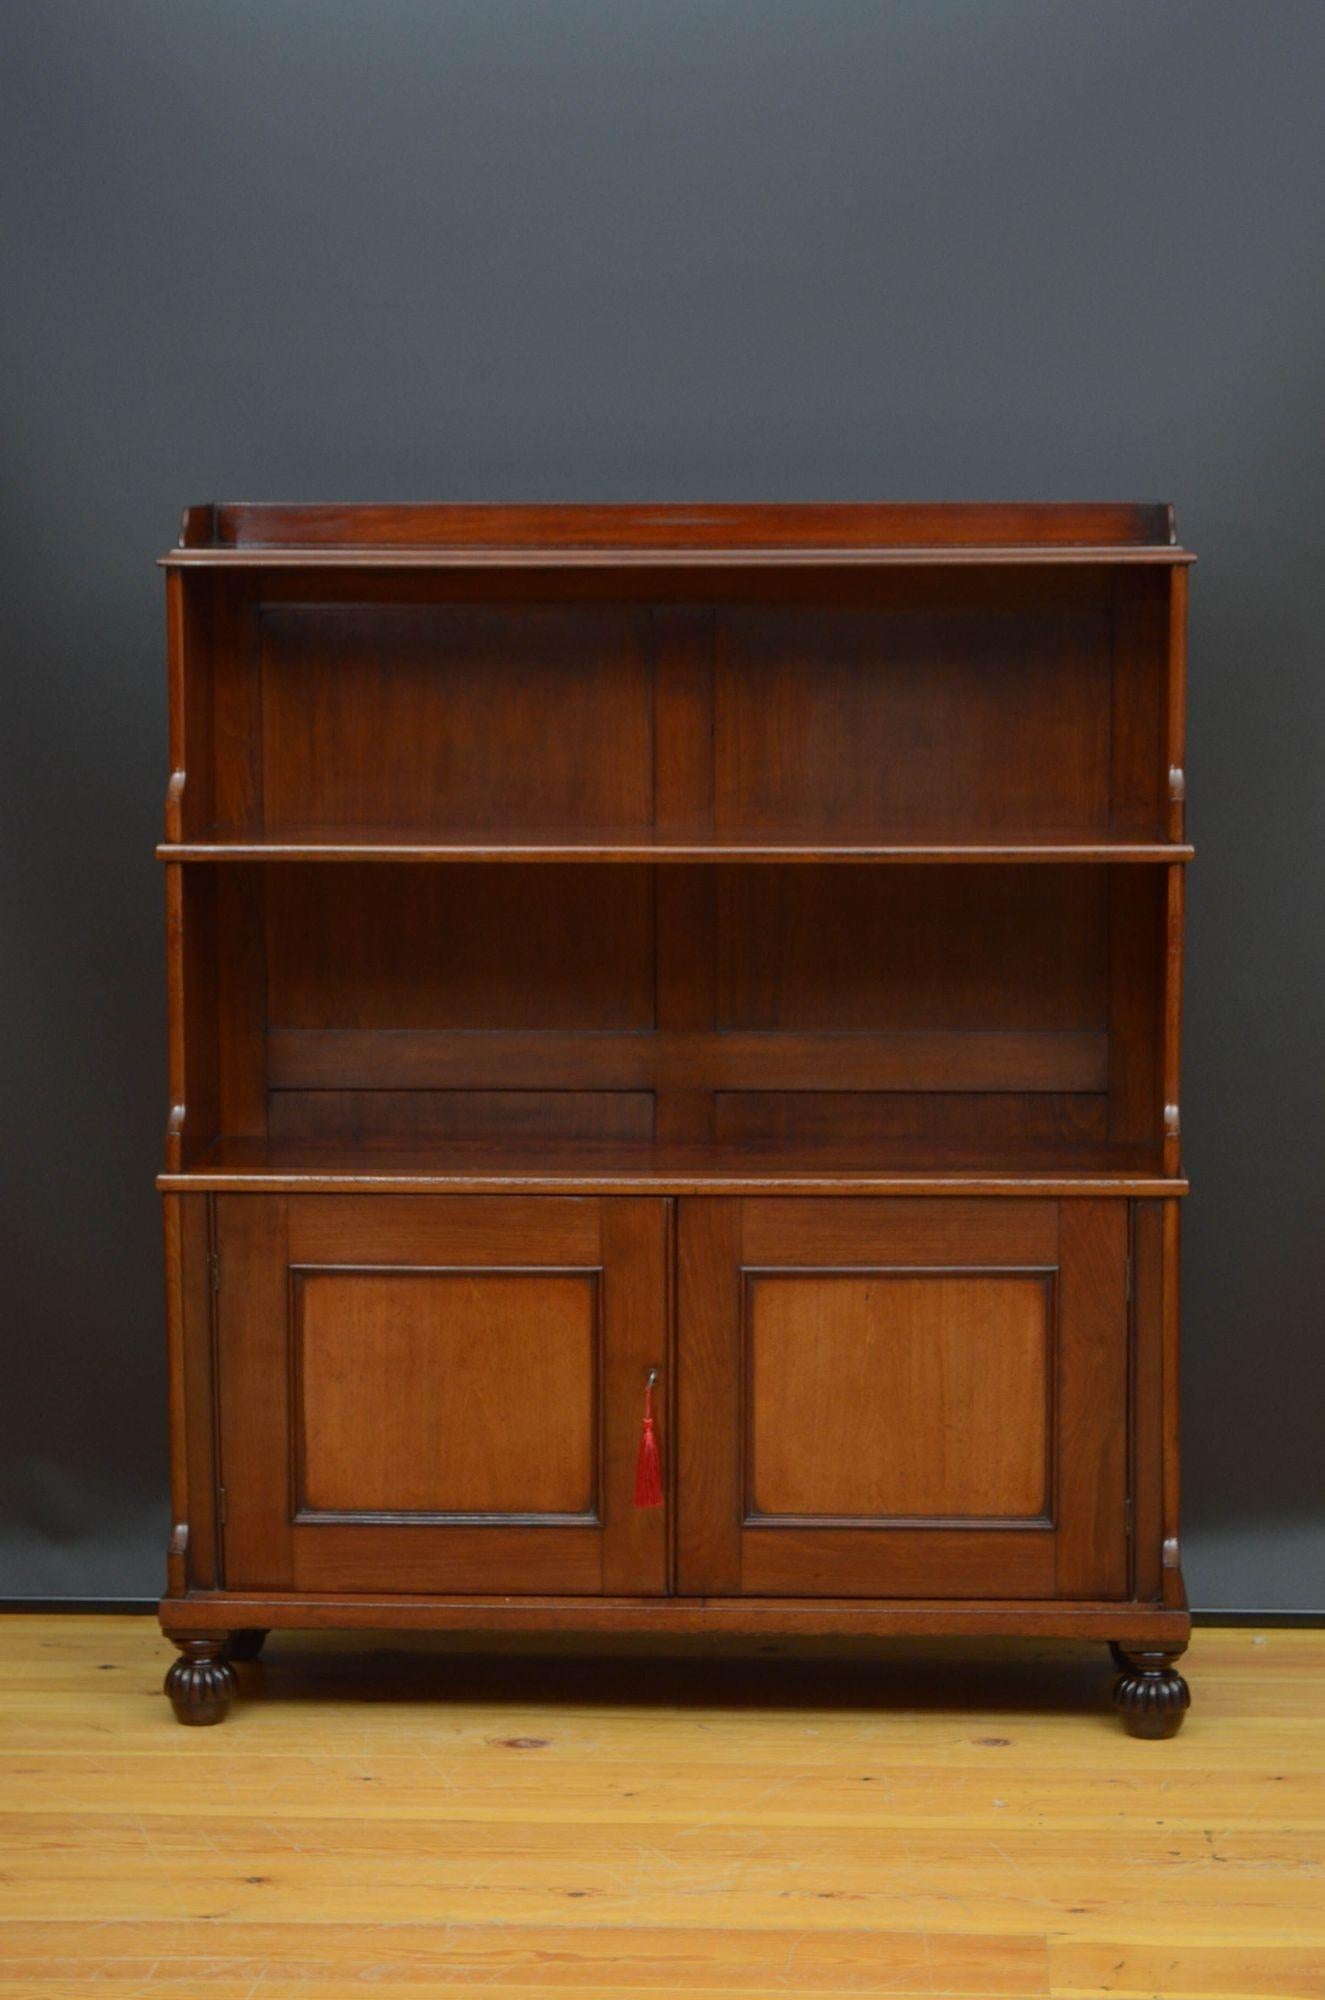 St014 Fine quality William IV mahogany bookcase, having shaped upstand, waterfall shelf arrangement and a pair of panelled cupboard doors fitted with original working lock and a key and enclosing shelf, all standing on fluted bun feet. This antique